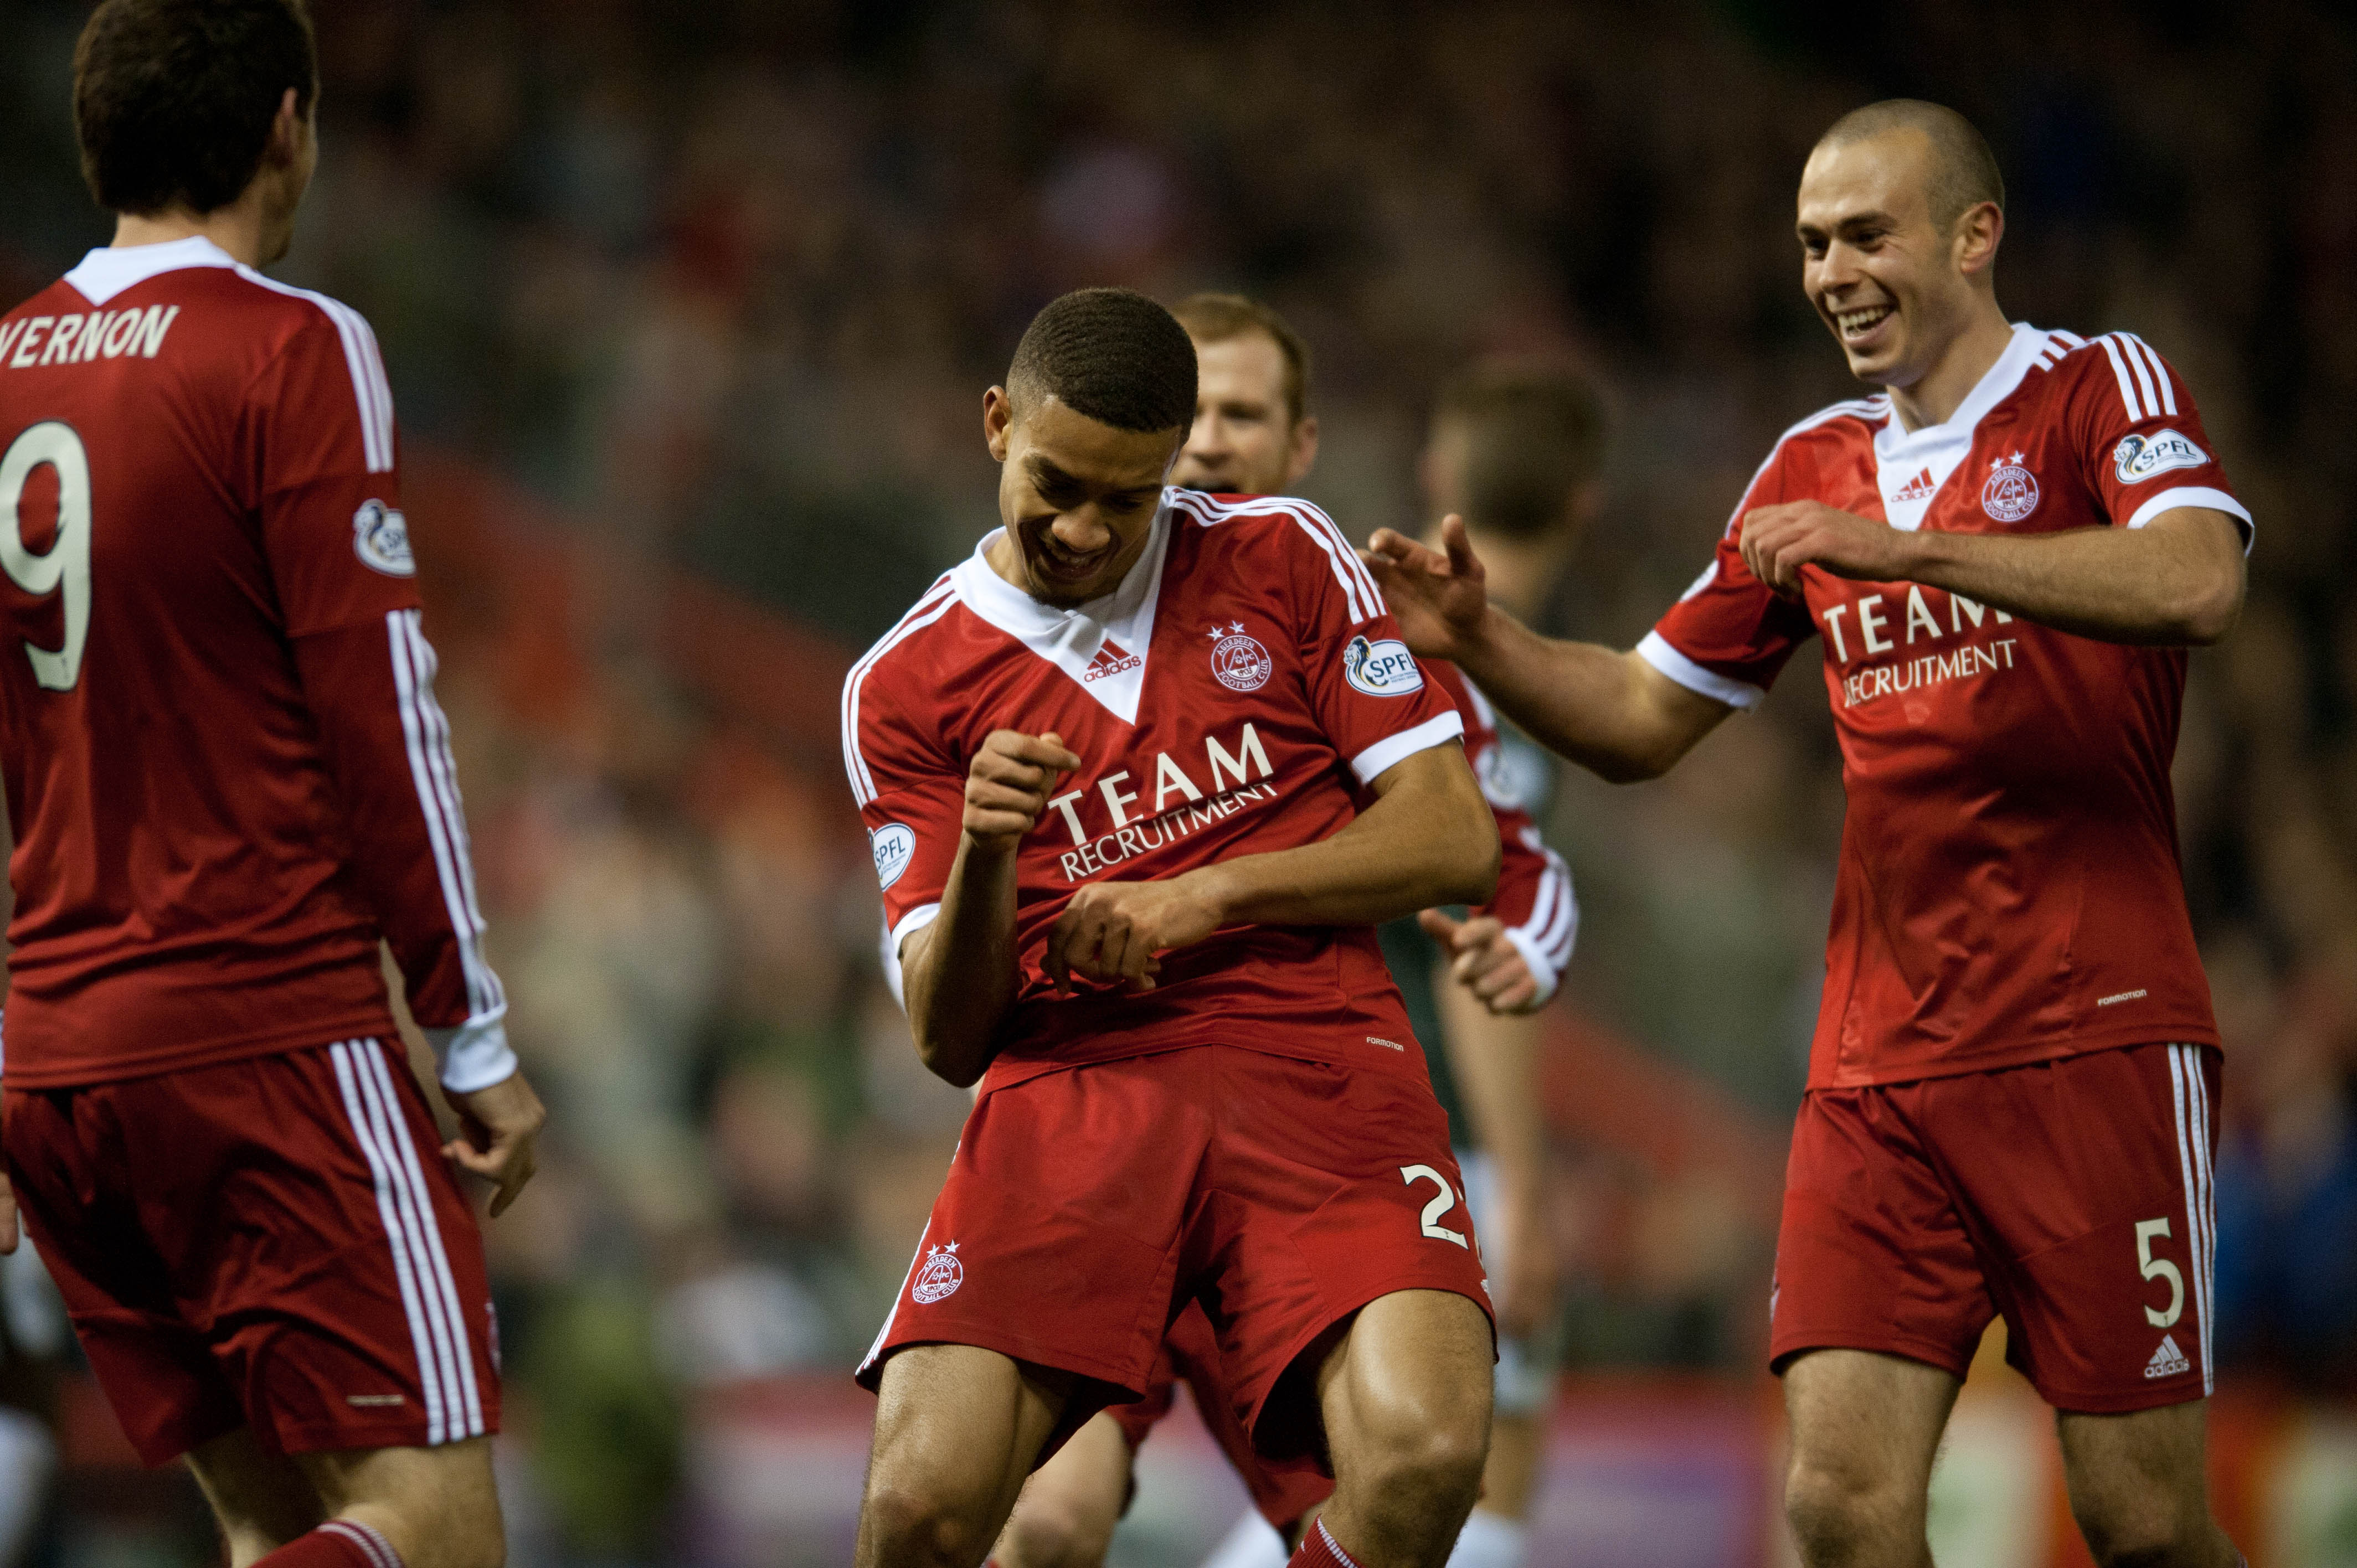 Michael Hector celebrates a goal for Aberdeen